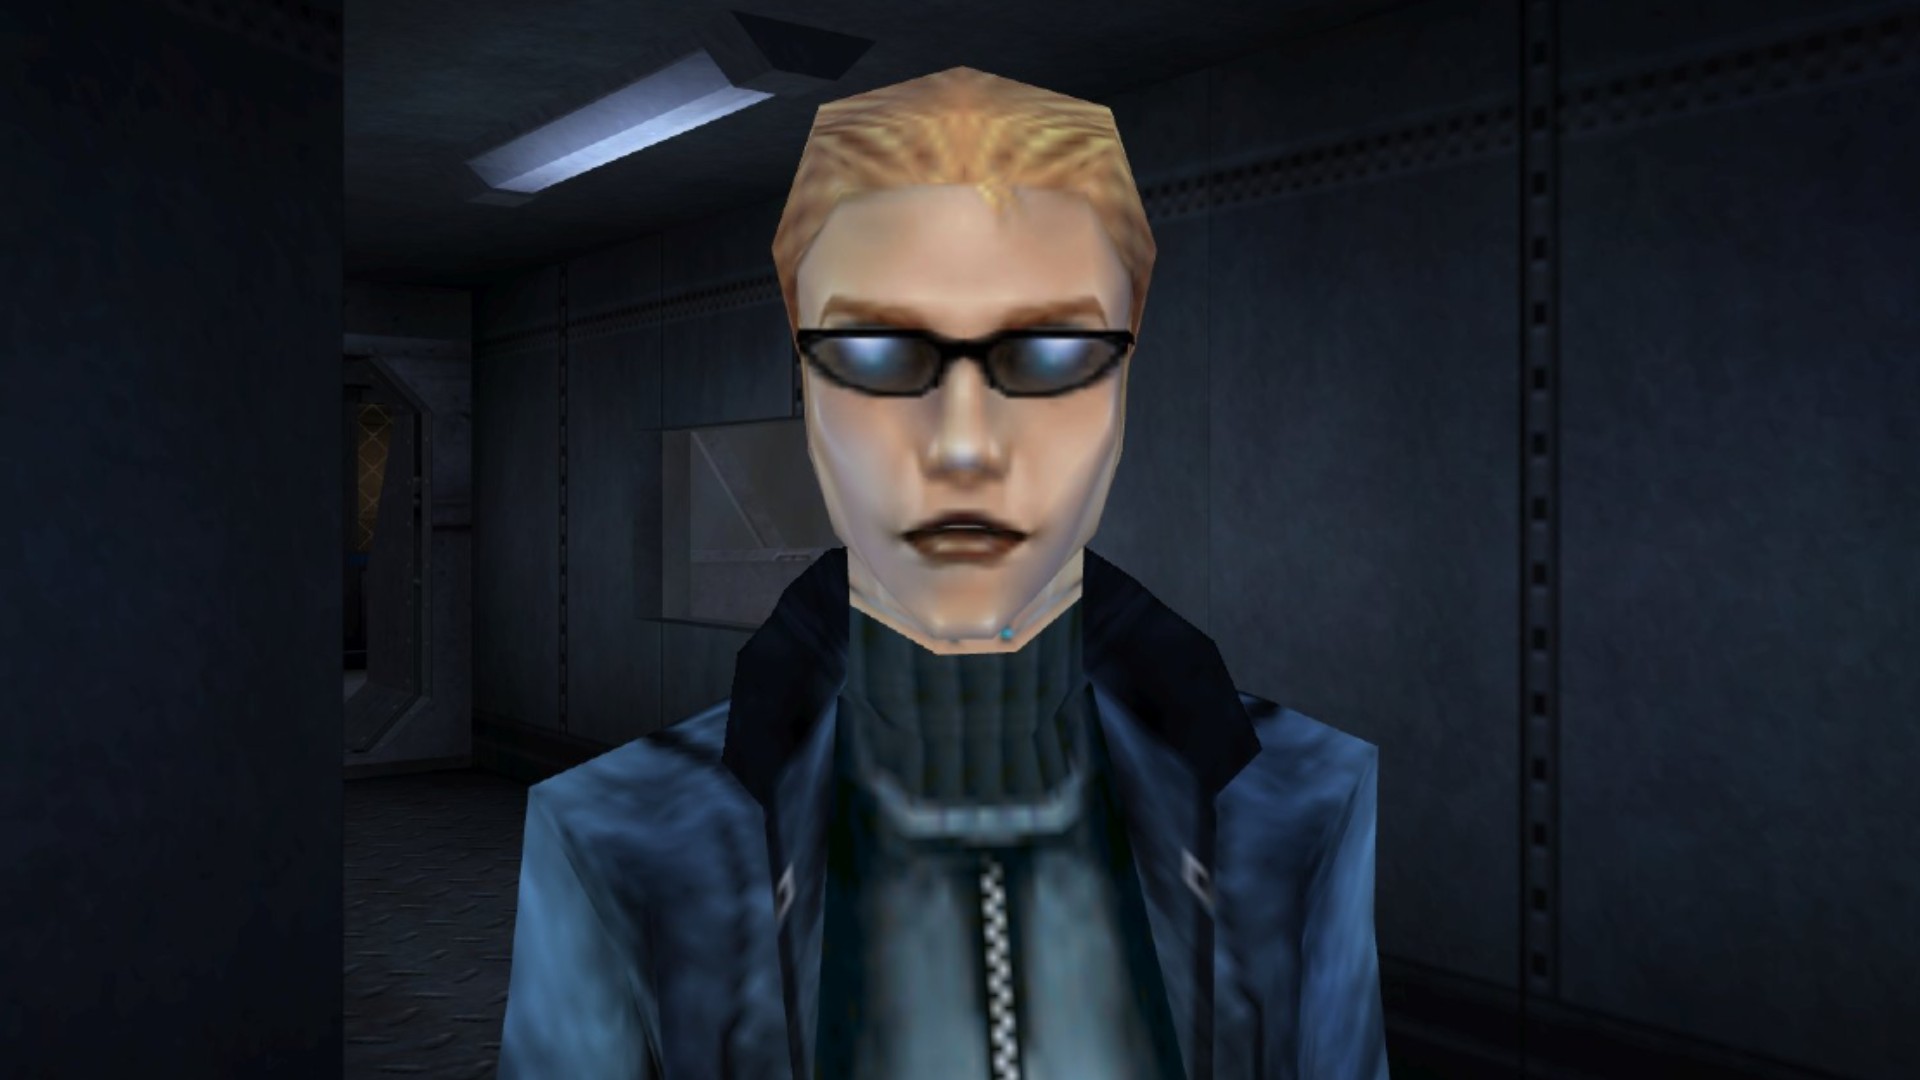 Deus Ex modded to include a female JC.